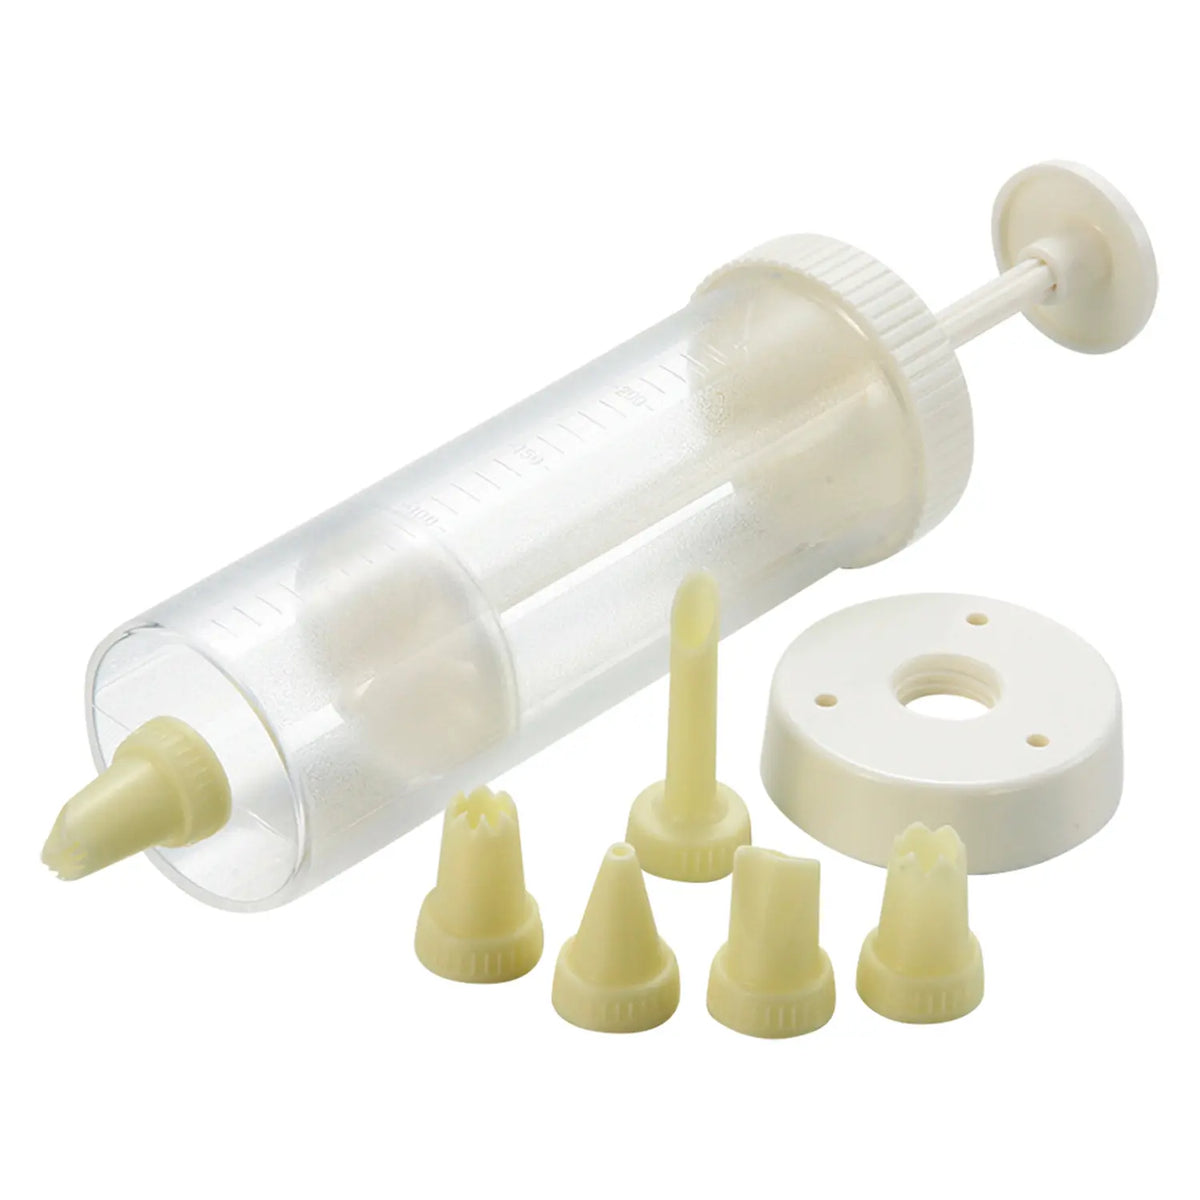 TIGERCROWN Cake Land Acrylic Resin Cookie Press with 6 Nozzles